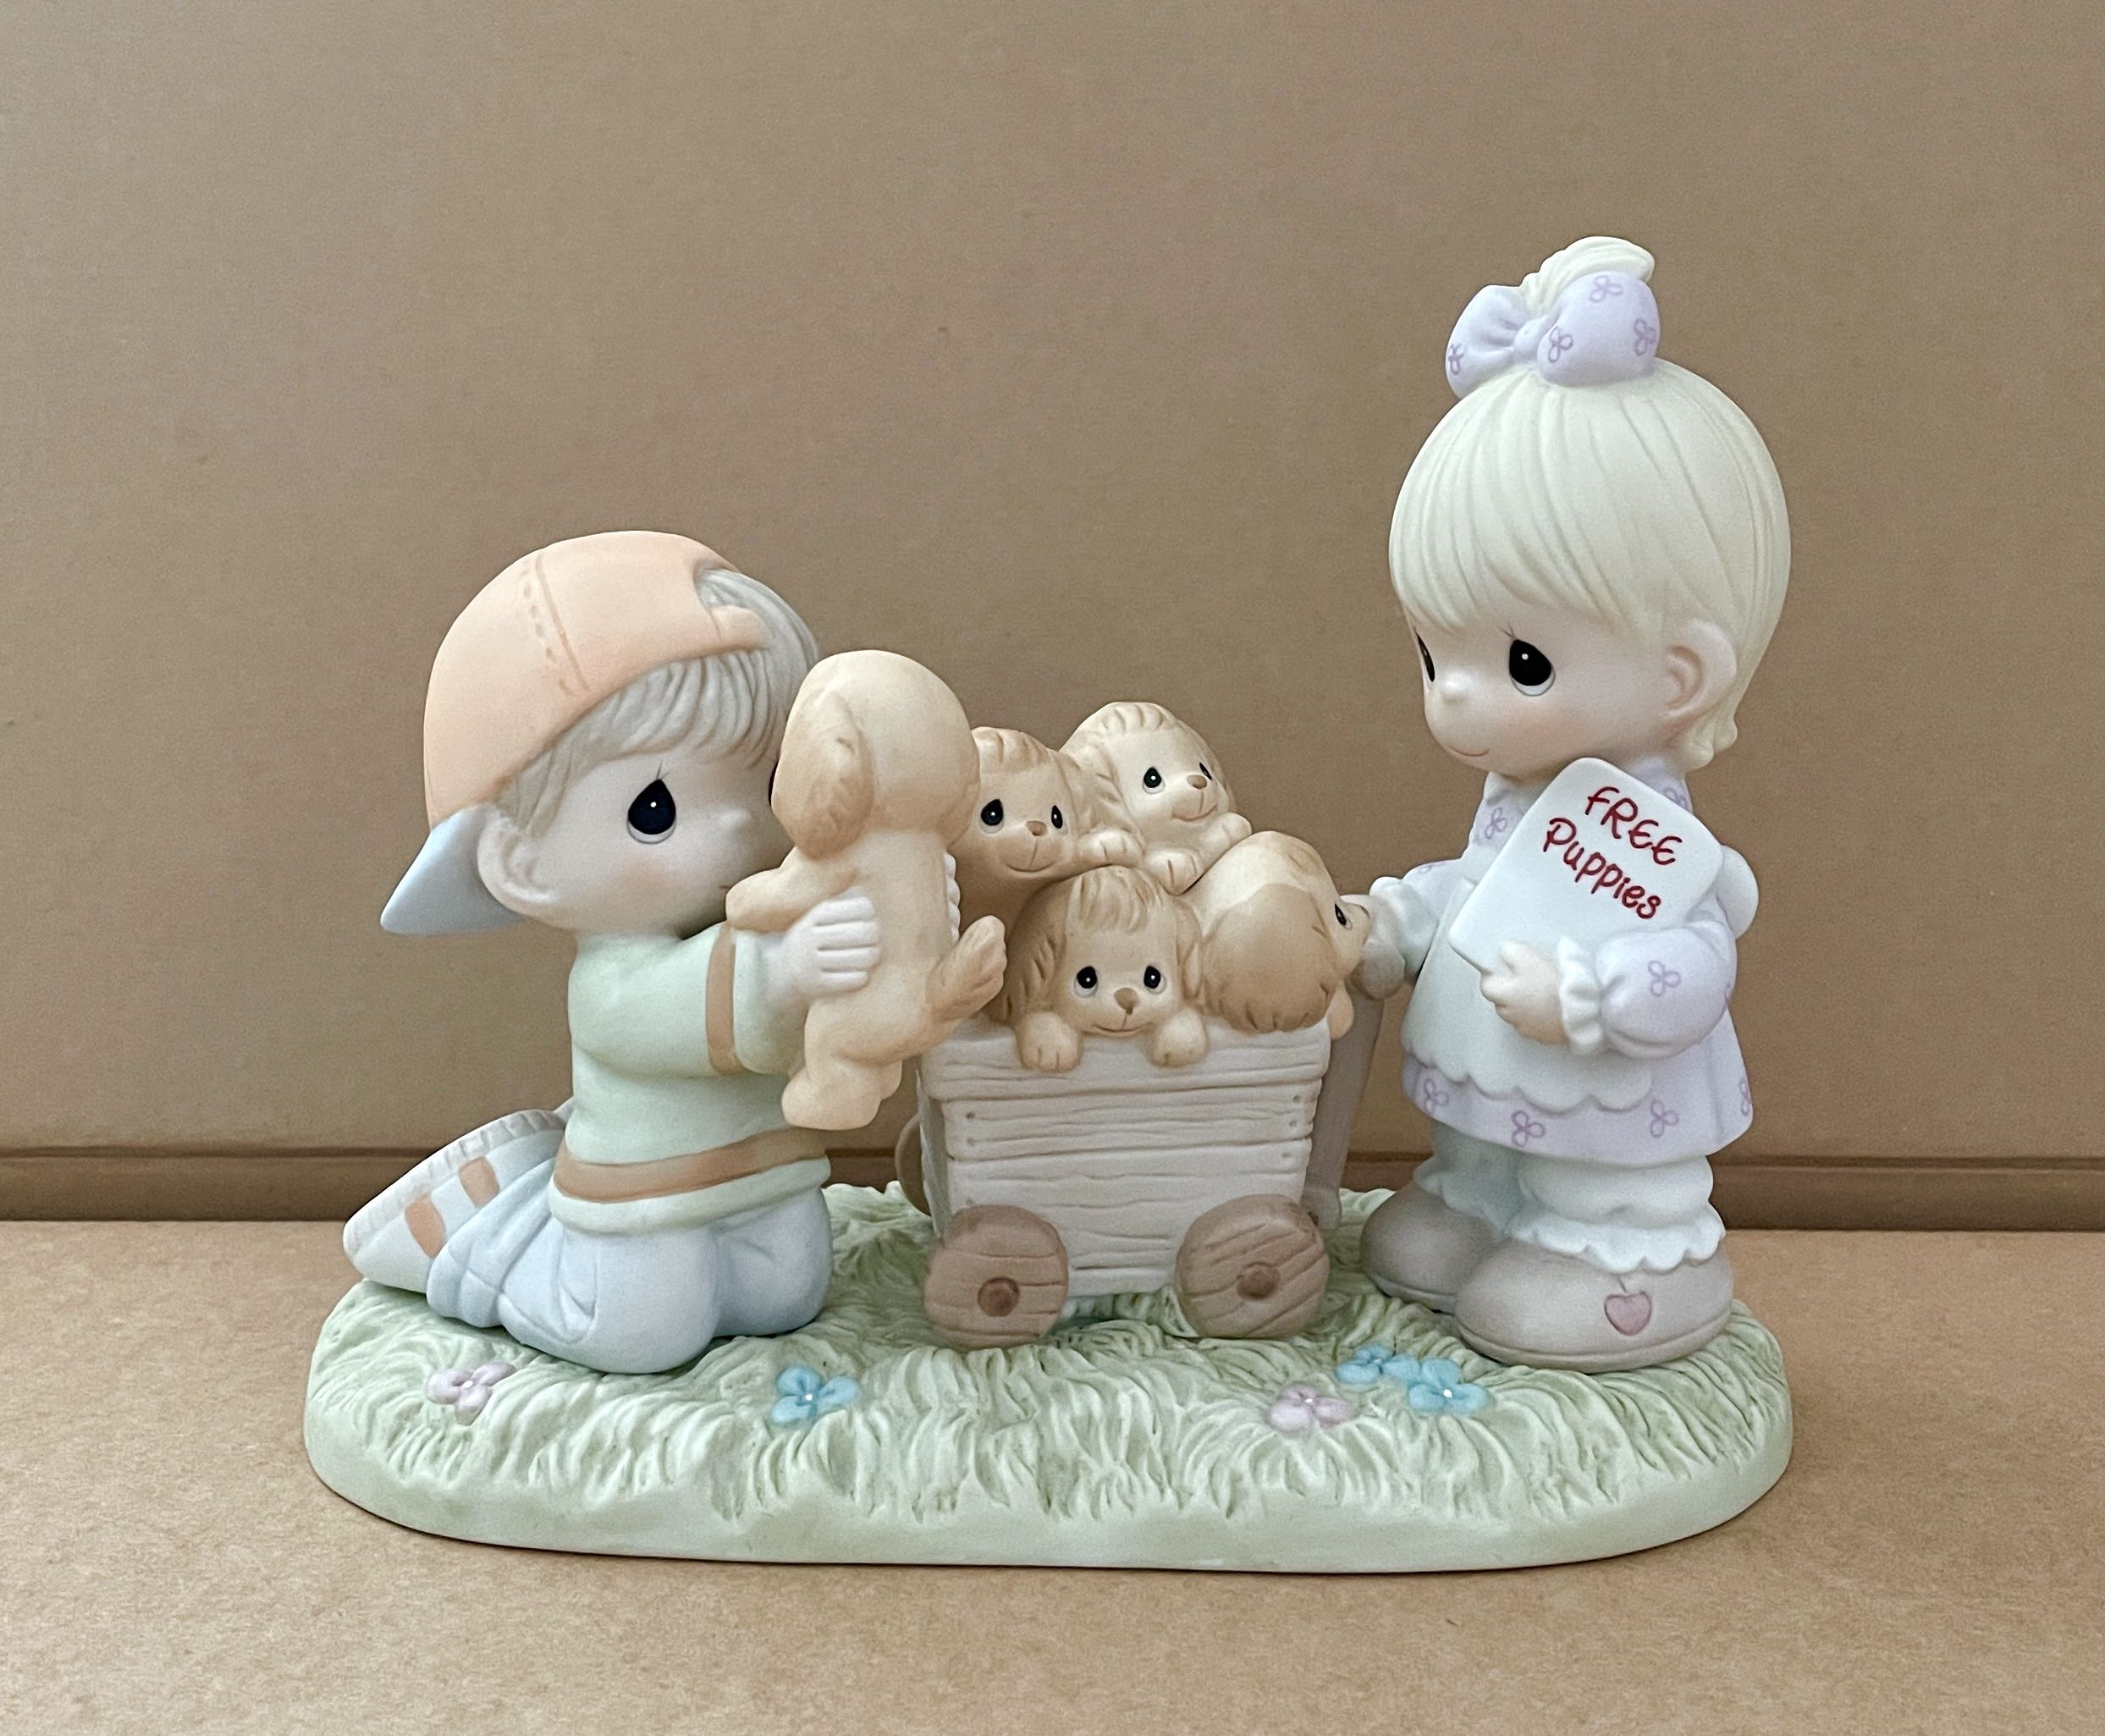 Precious Moments 144008 Appreciation Gifts Our Friendship is The Perfect Blend Bisque Porcelain Figurine